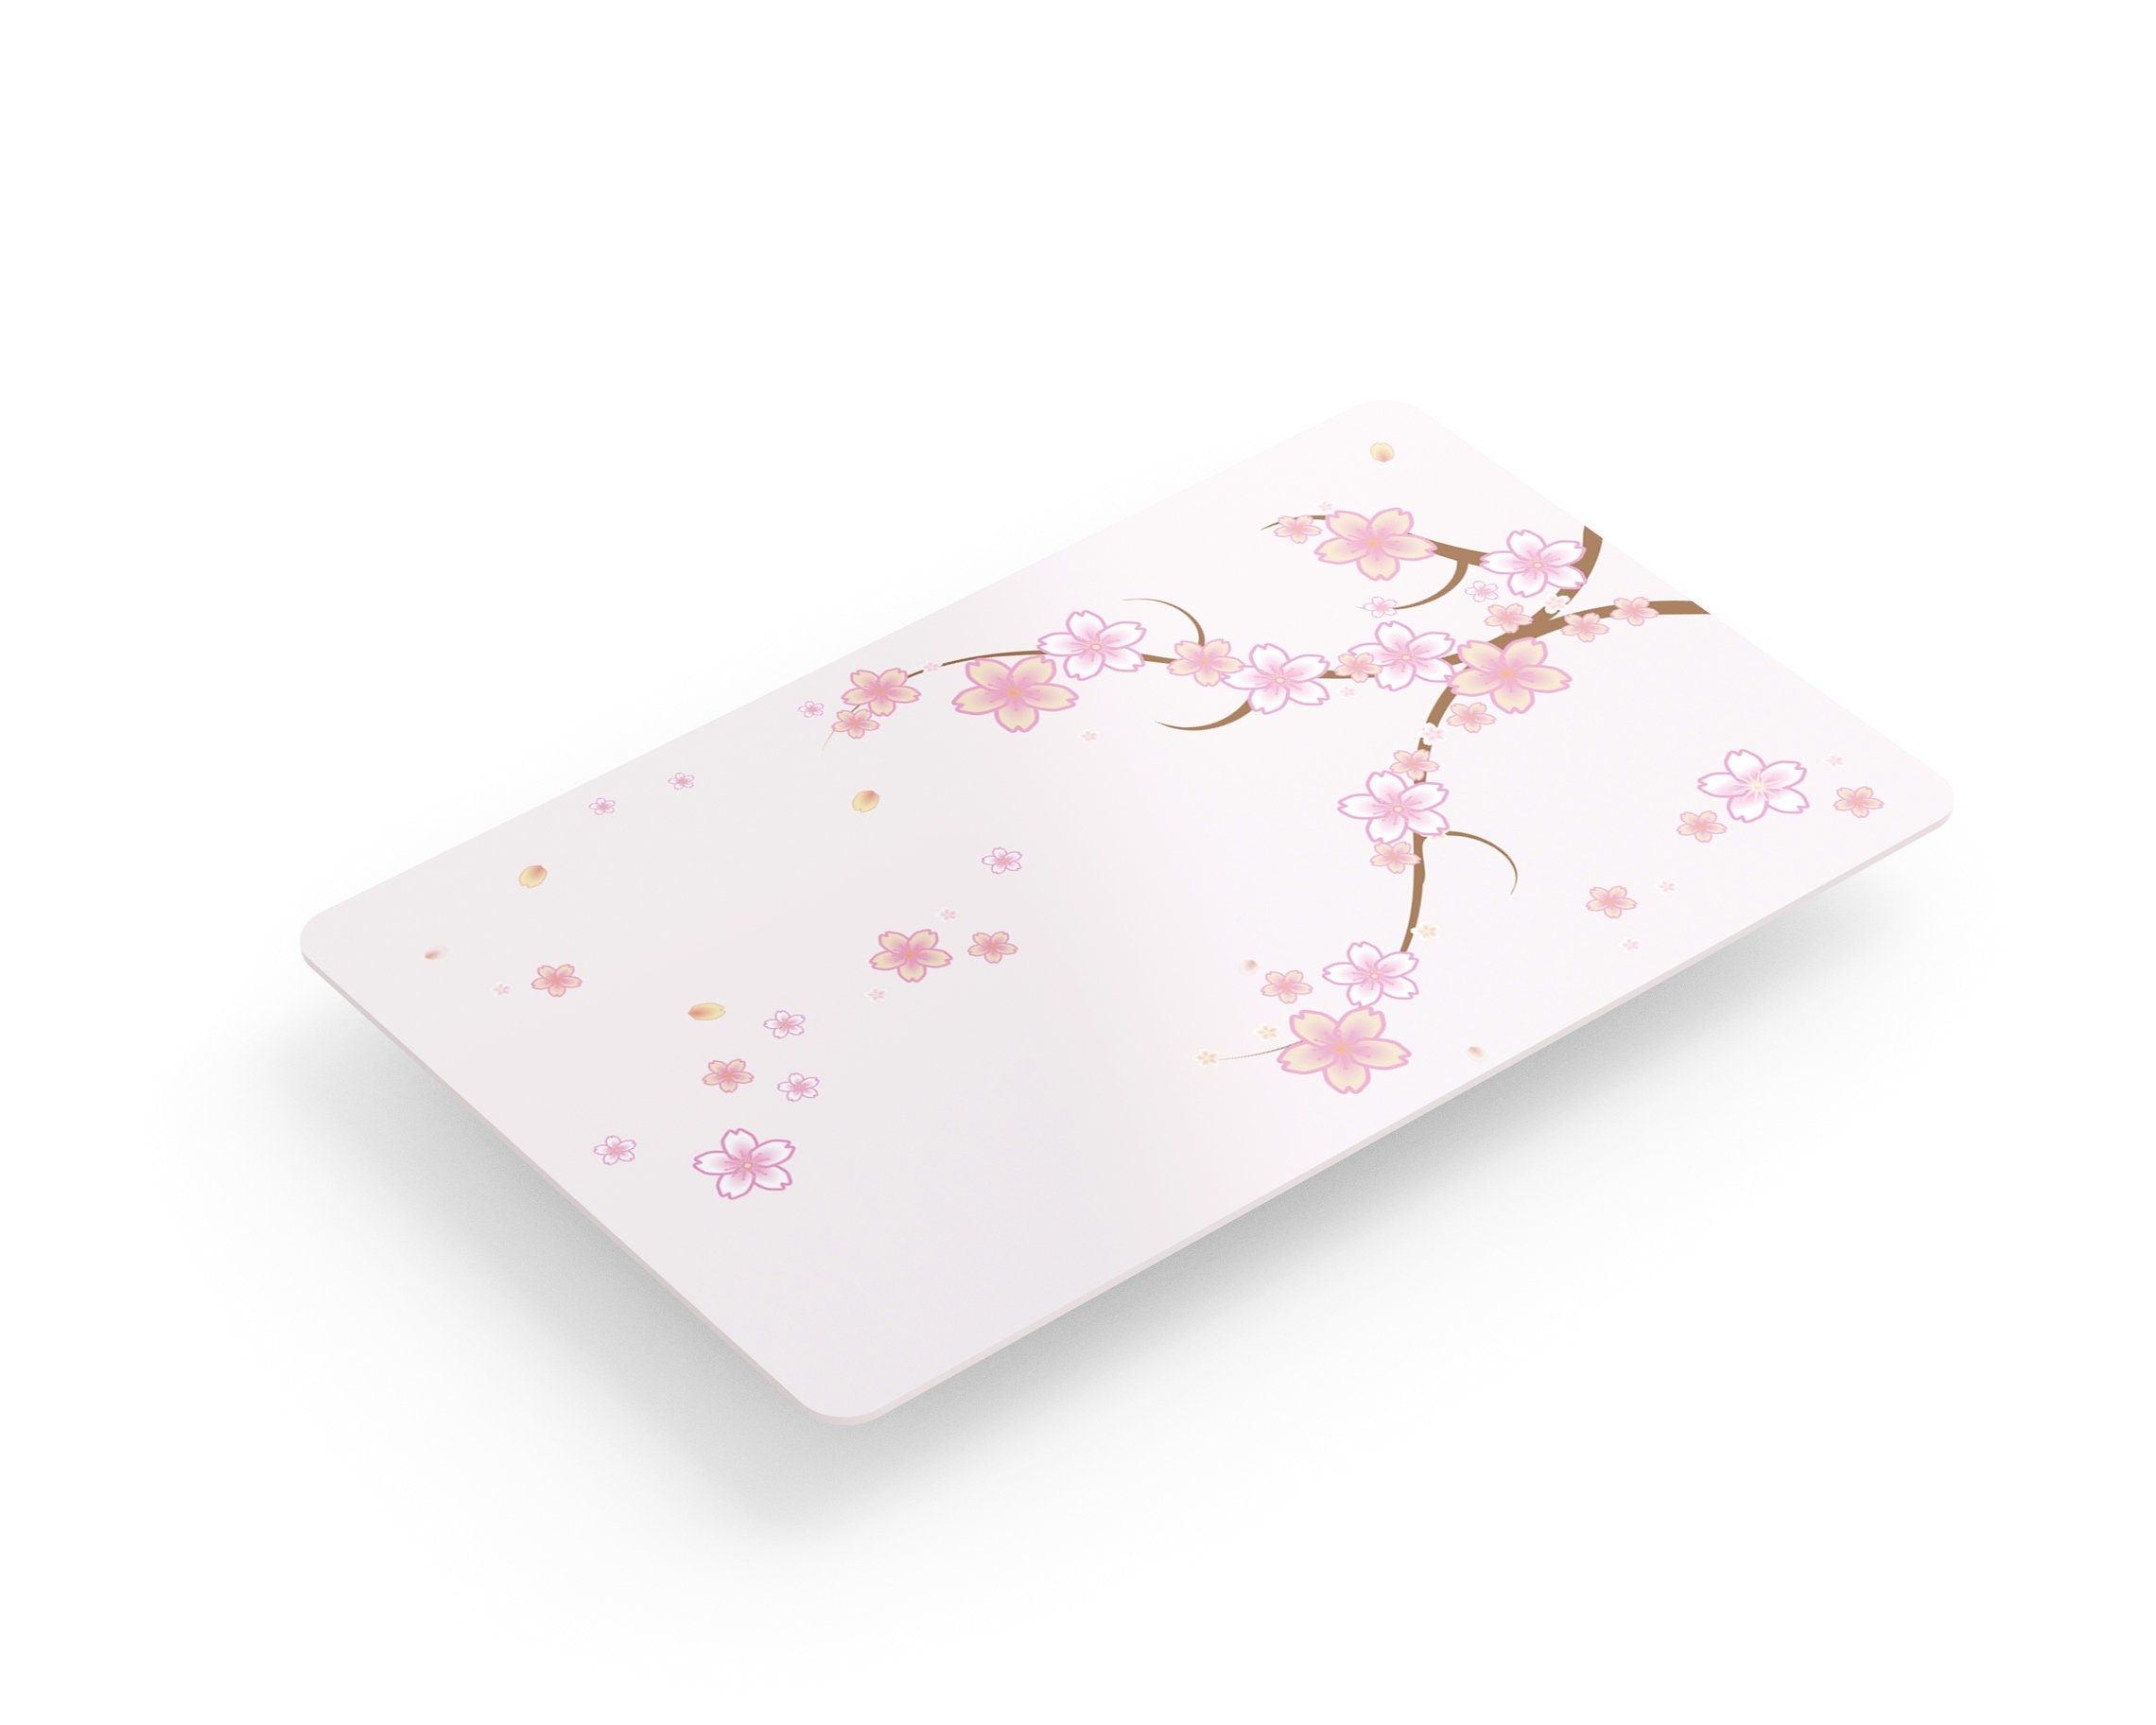 Credit Card Skin Debit Card Stickers Japanese Style Card Skin Cover Slim No  Bubble Vinyl Card Stickers…